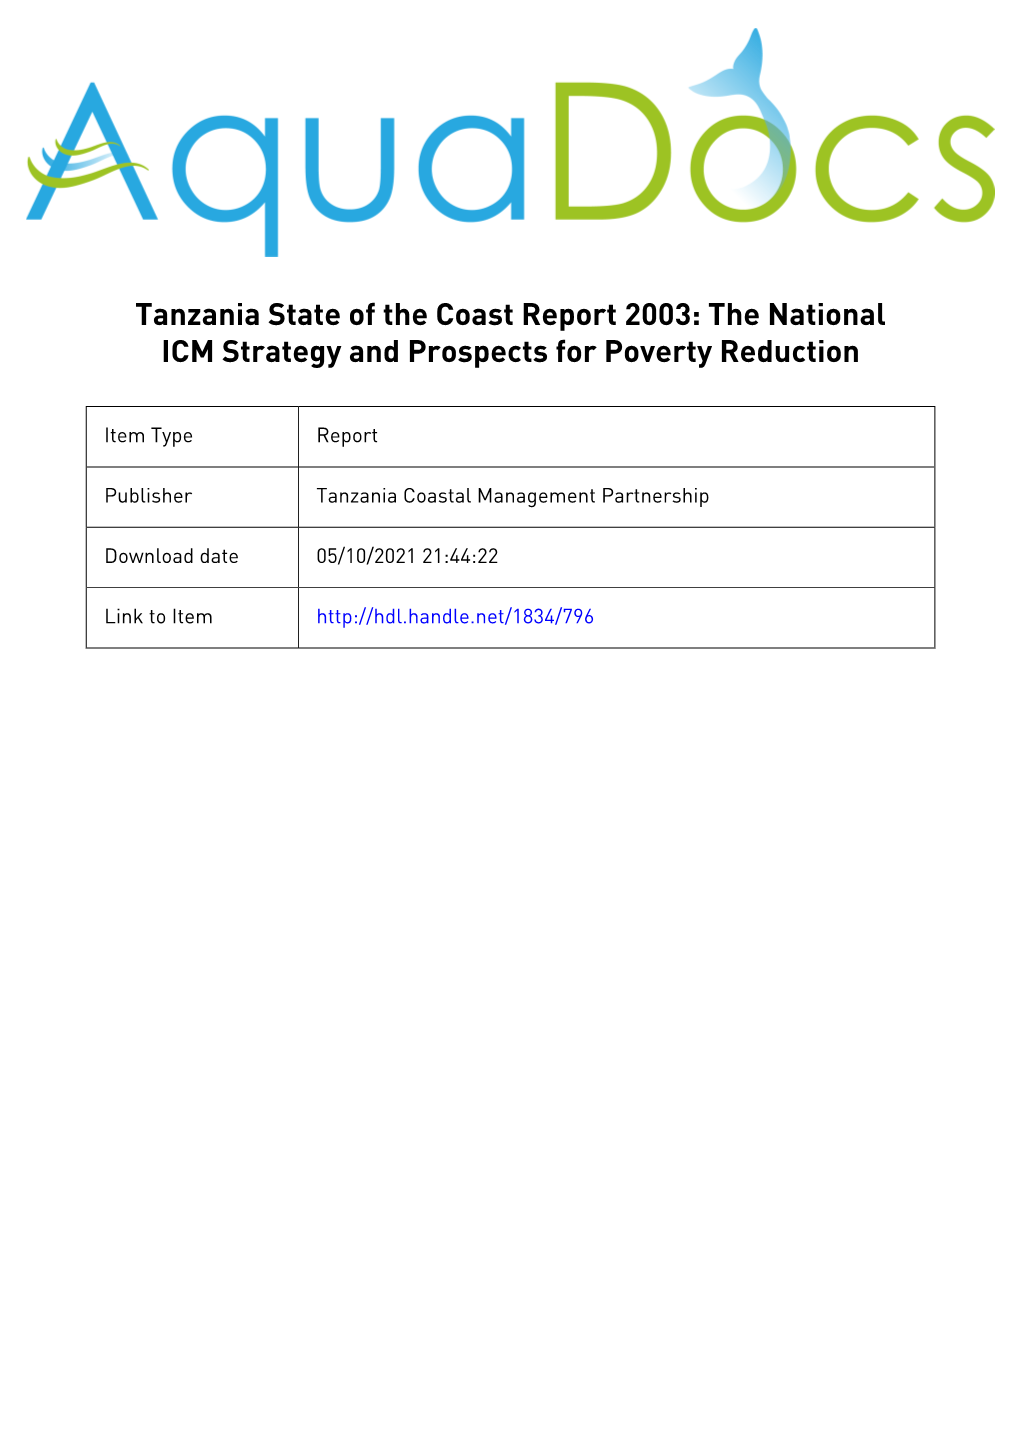 Tanzania State of the Coast Report 2003: the National ICM Strategy and Prospects for Poverty Reduction